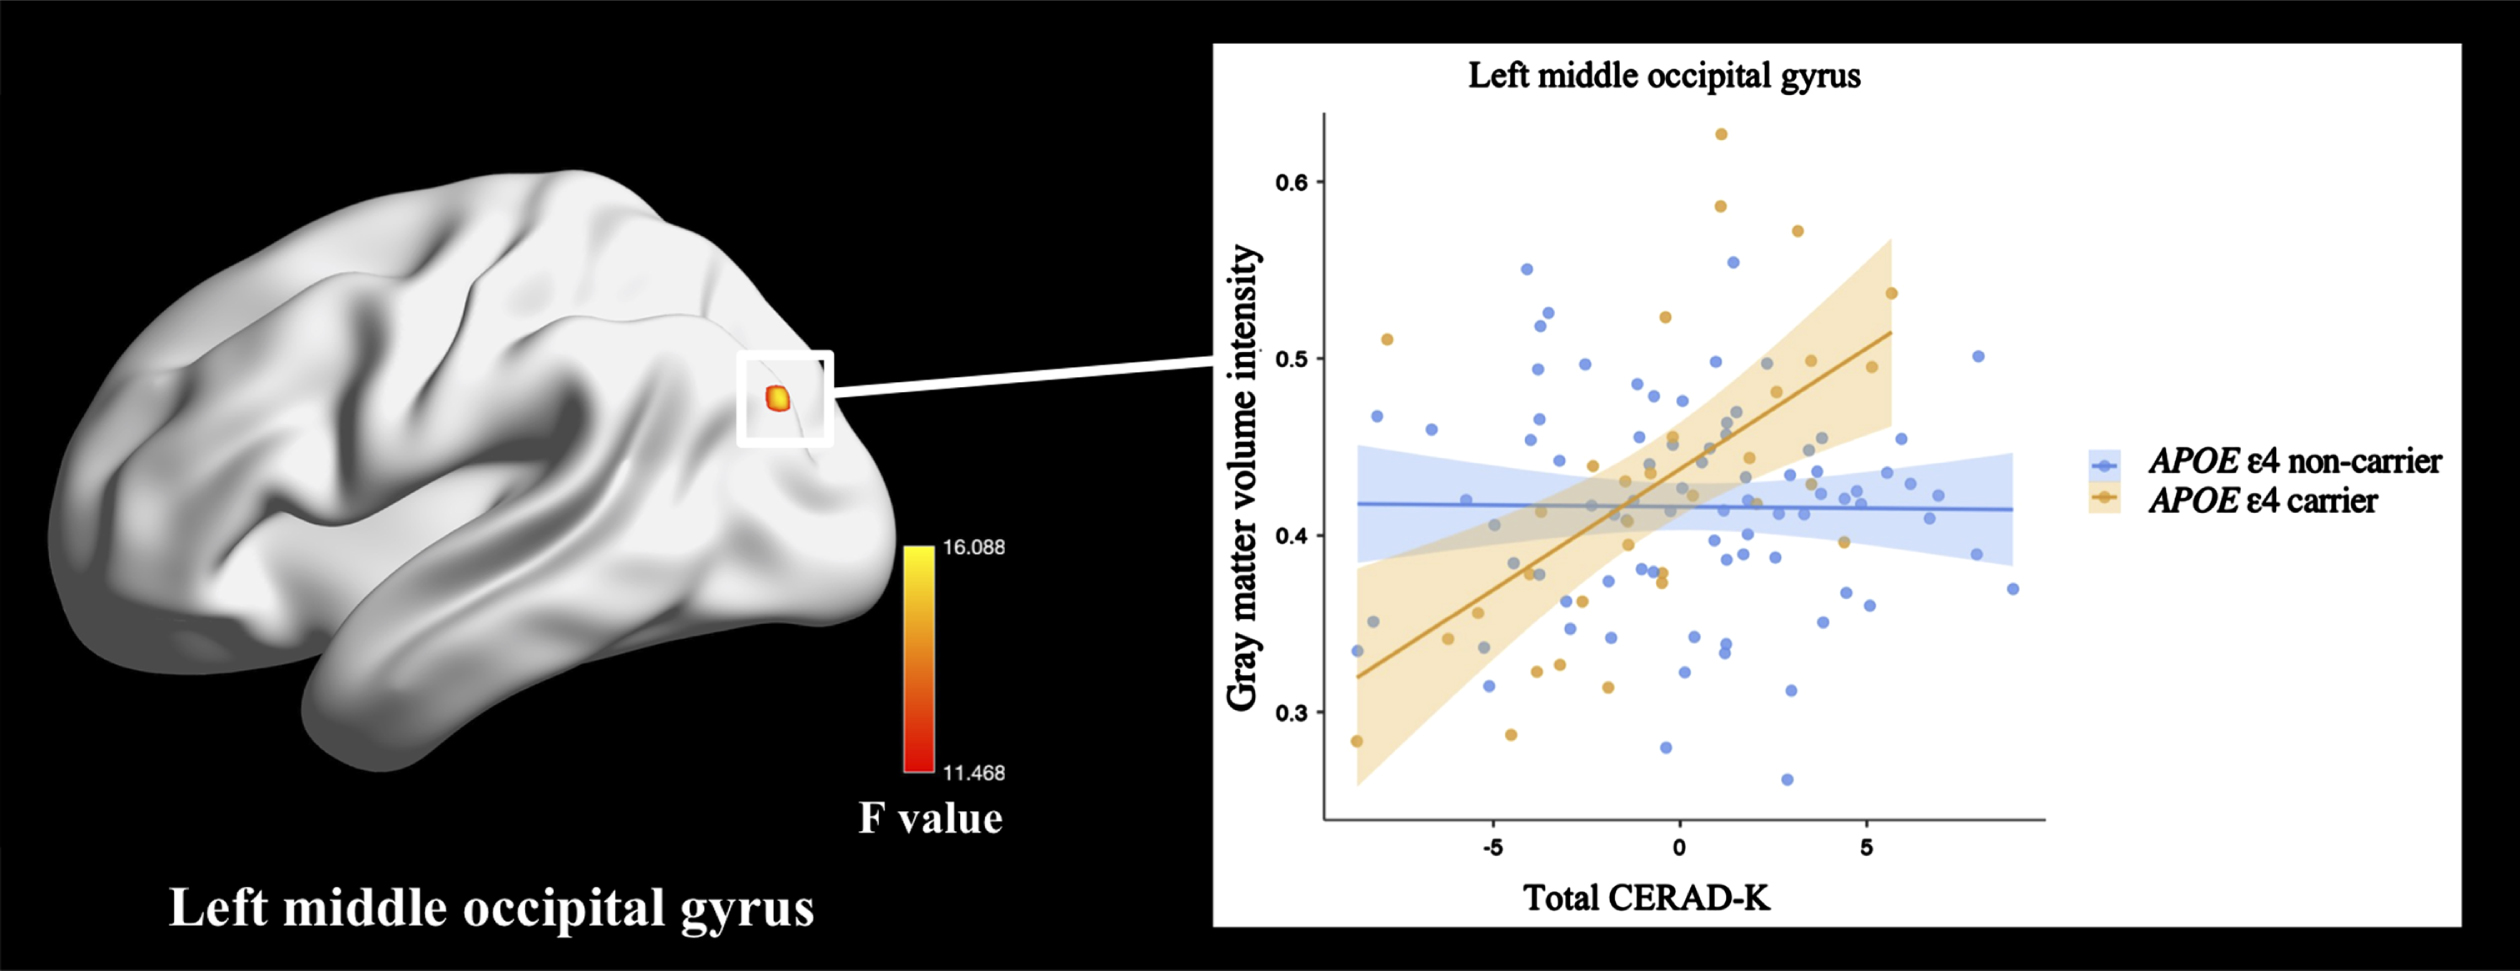 Impact of the interaction between global cognitive function and APOE ɛ4 carrier status on cortical volume in cognitively normal older adults with sub-threshold Aβ deposition. General linear model analysis adjusting for age, sex, years of education, and total intracranial volume. Thresholds were set using GRFT correction at a p < 0.05, voxel p < 0.001. The statistical threshold of cluster size > 44. Total CERAD-K, composite score summing respective z-scores of the CERAD-K VF, BNT, WLM, CP, WLR, and WLRc domains.